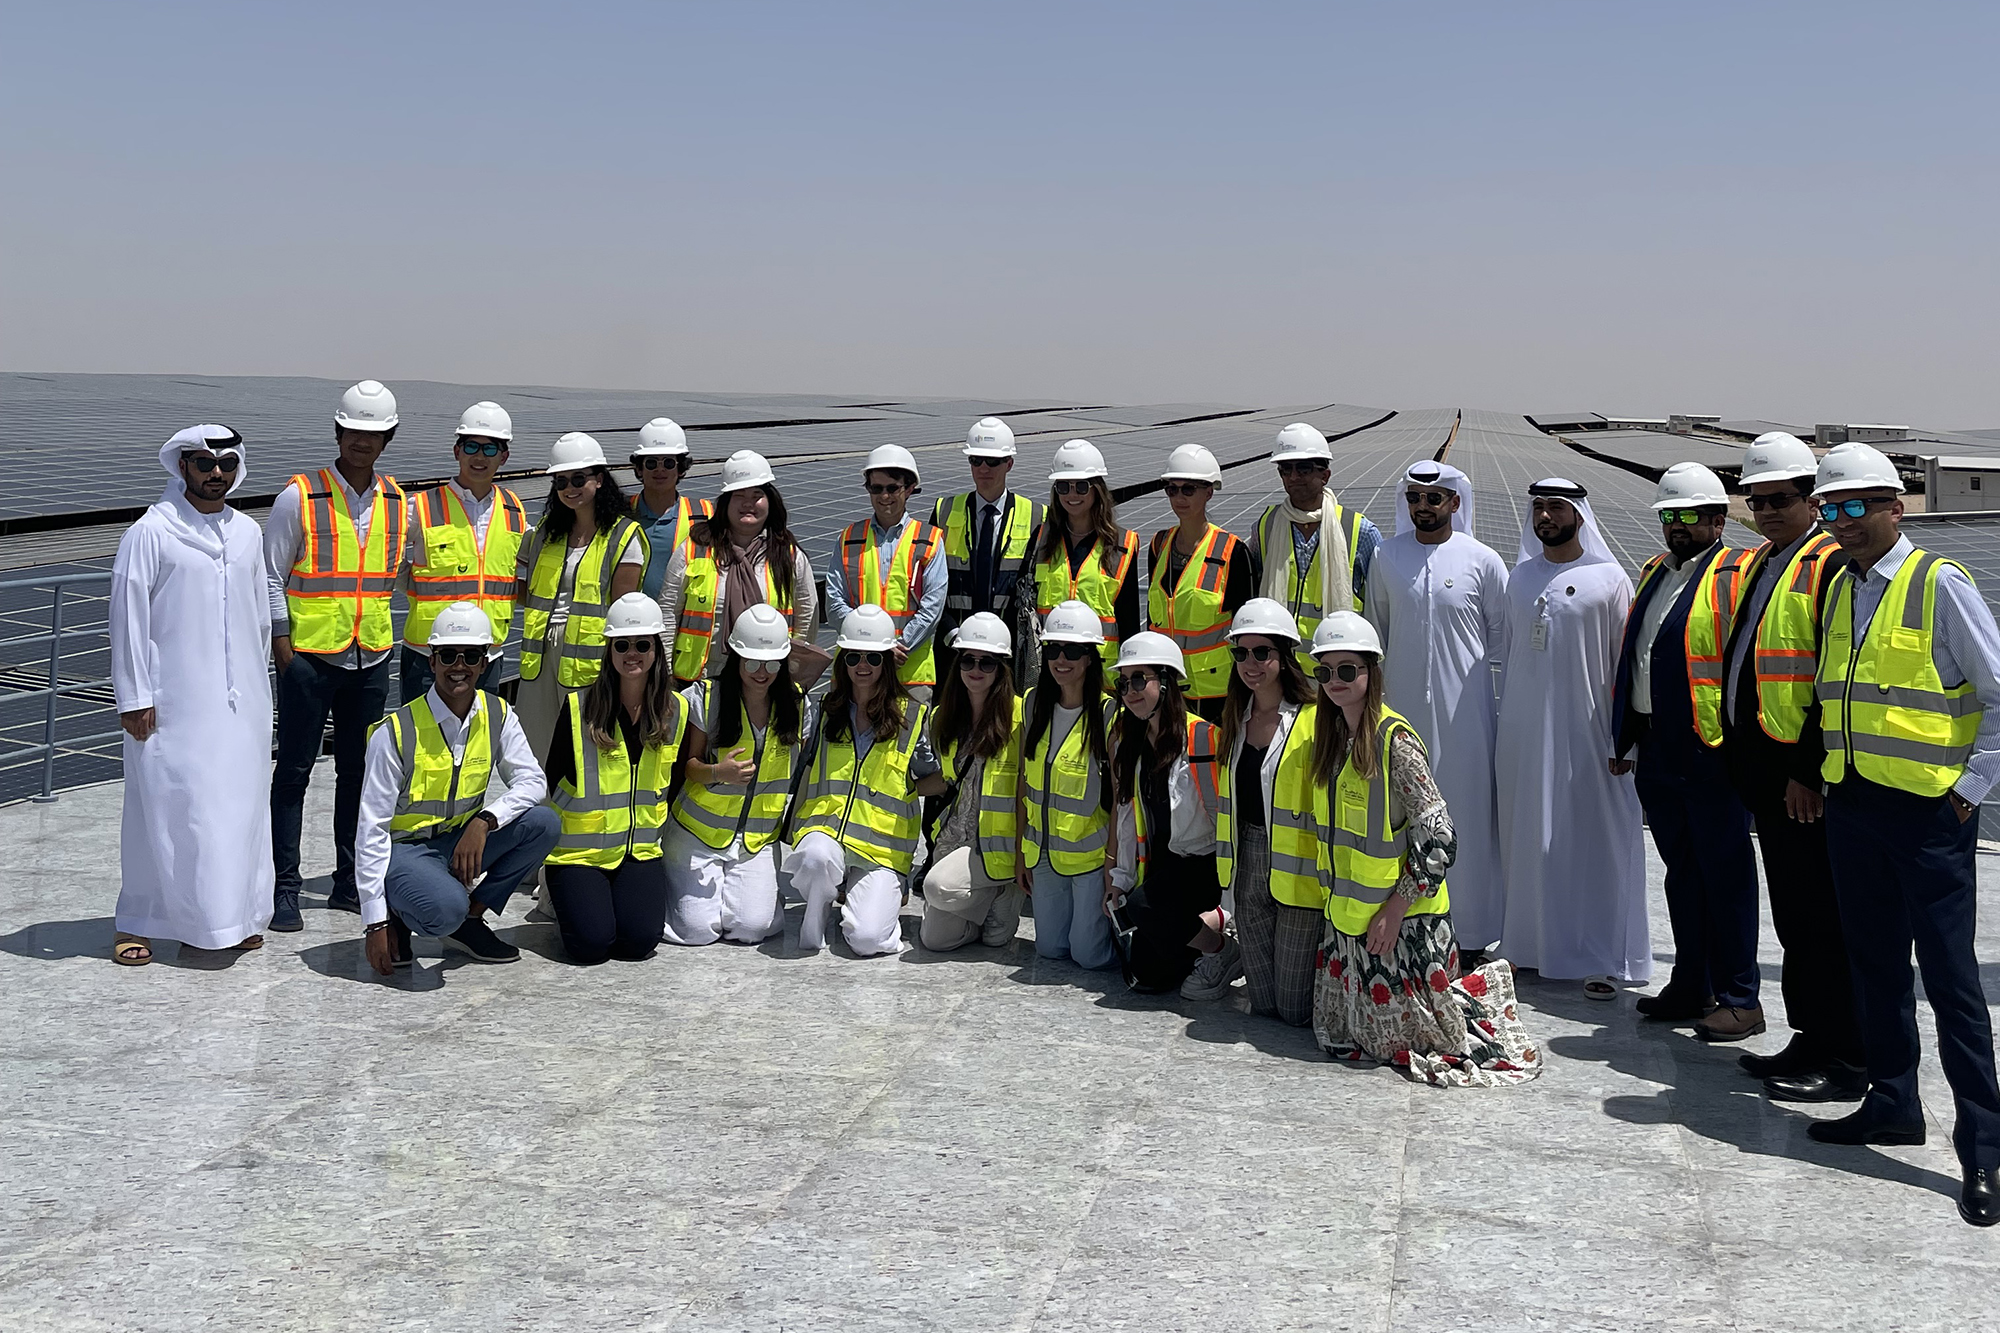 A group shot of students and officials in hard hats atop a roof of solar panels.